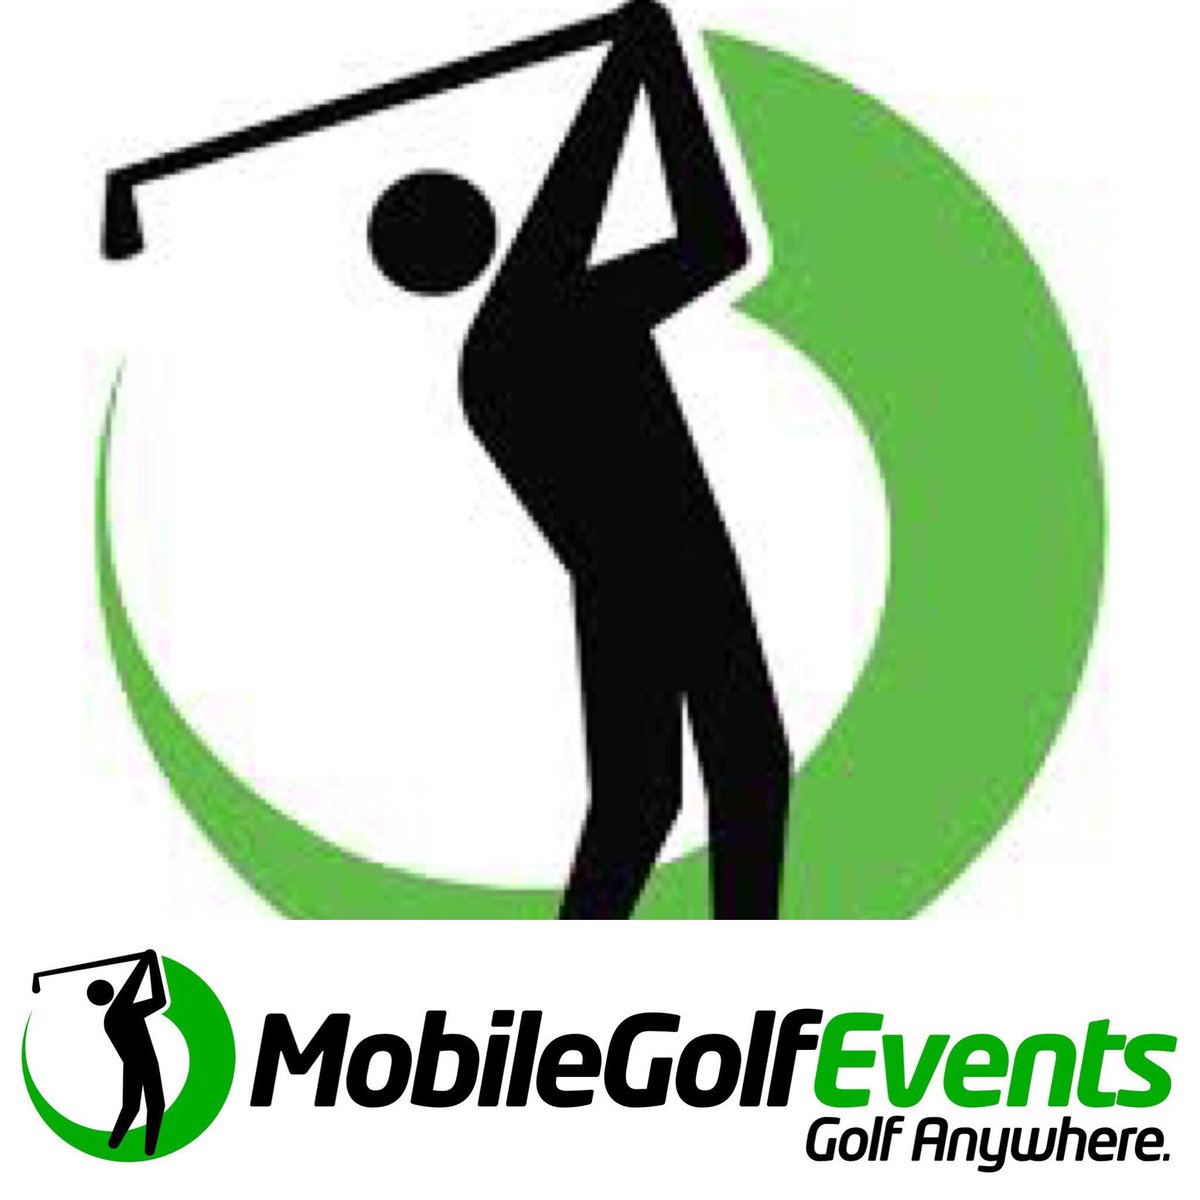 Compete for 2 tickets from the PGA TOUR Championship with @MobileGolfEvent at Women's Golf Day in GA celebration! 6/6
Free event.  Register using link in bio or at: goo.gl/Ejzxjn 
#mobilegolfevents 
#pgatourchampionship 
#pga #golf #georgia #gwmb #womensgolfdayingeorgia